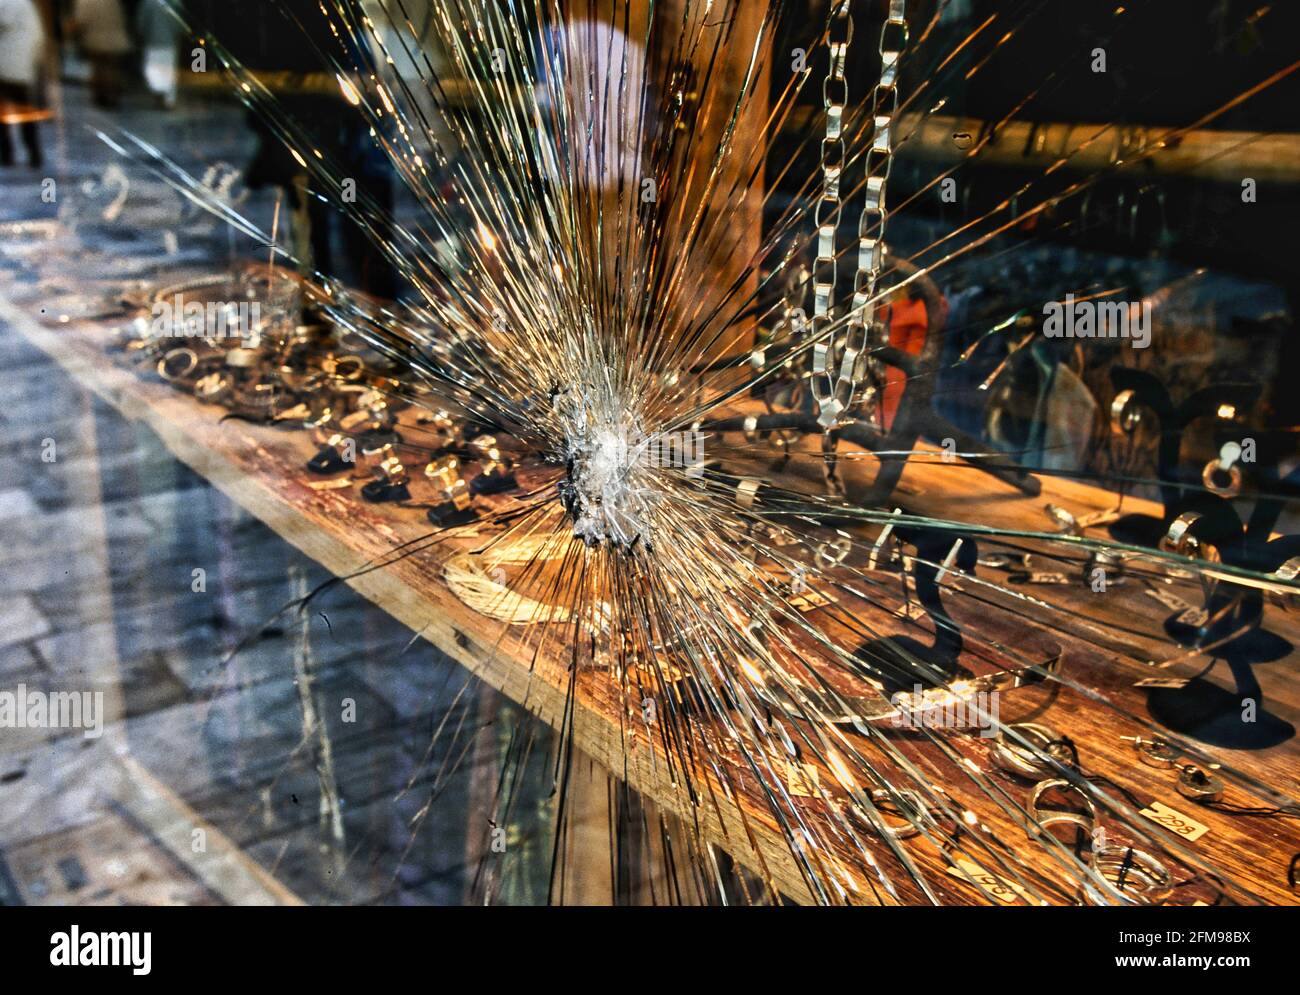 Failed robbery - a graphic view of a smashed jewellers window in St. Marks Square, Venice Stock Photo